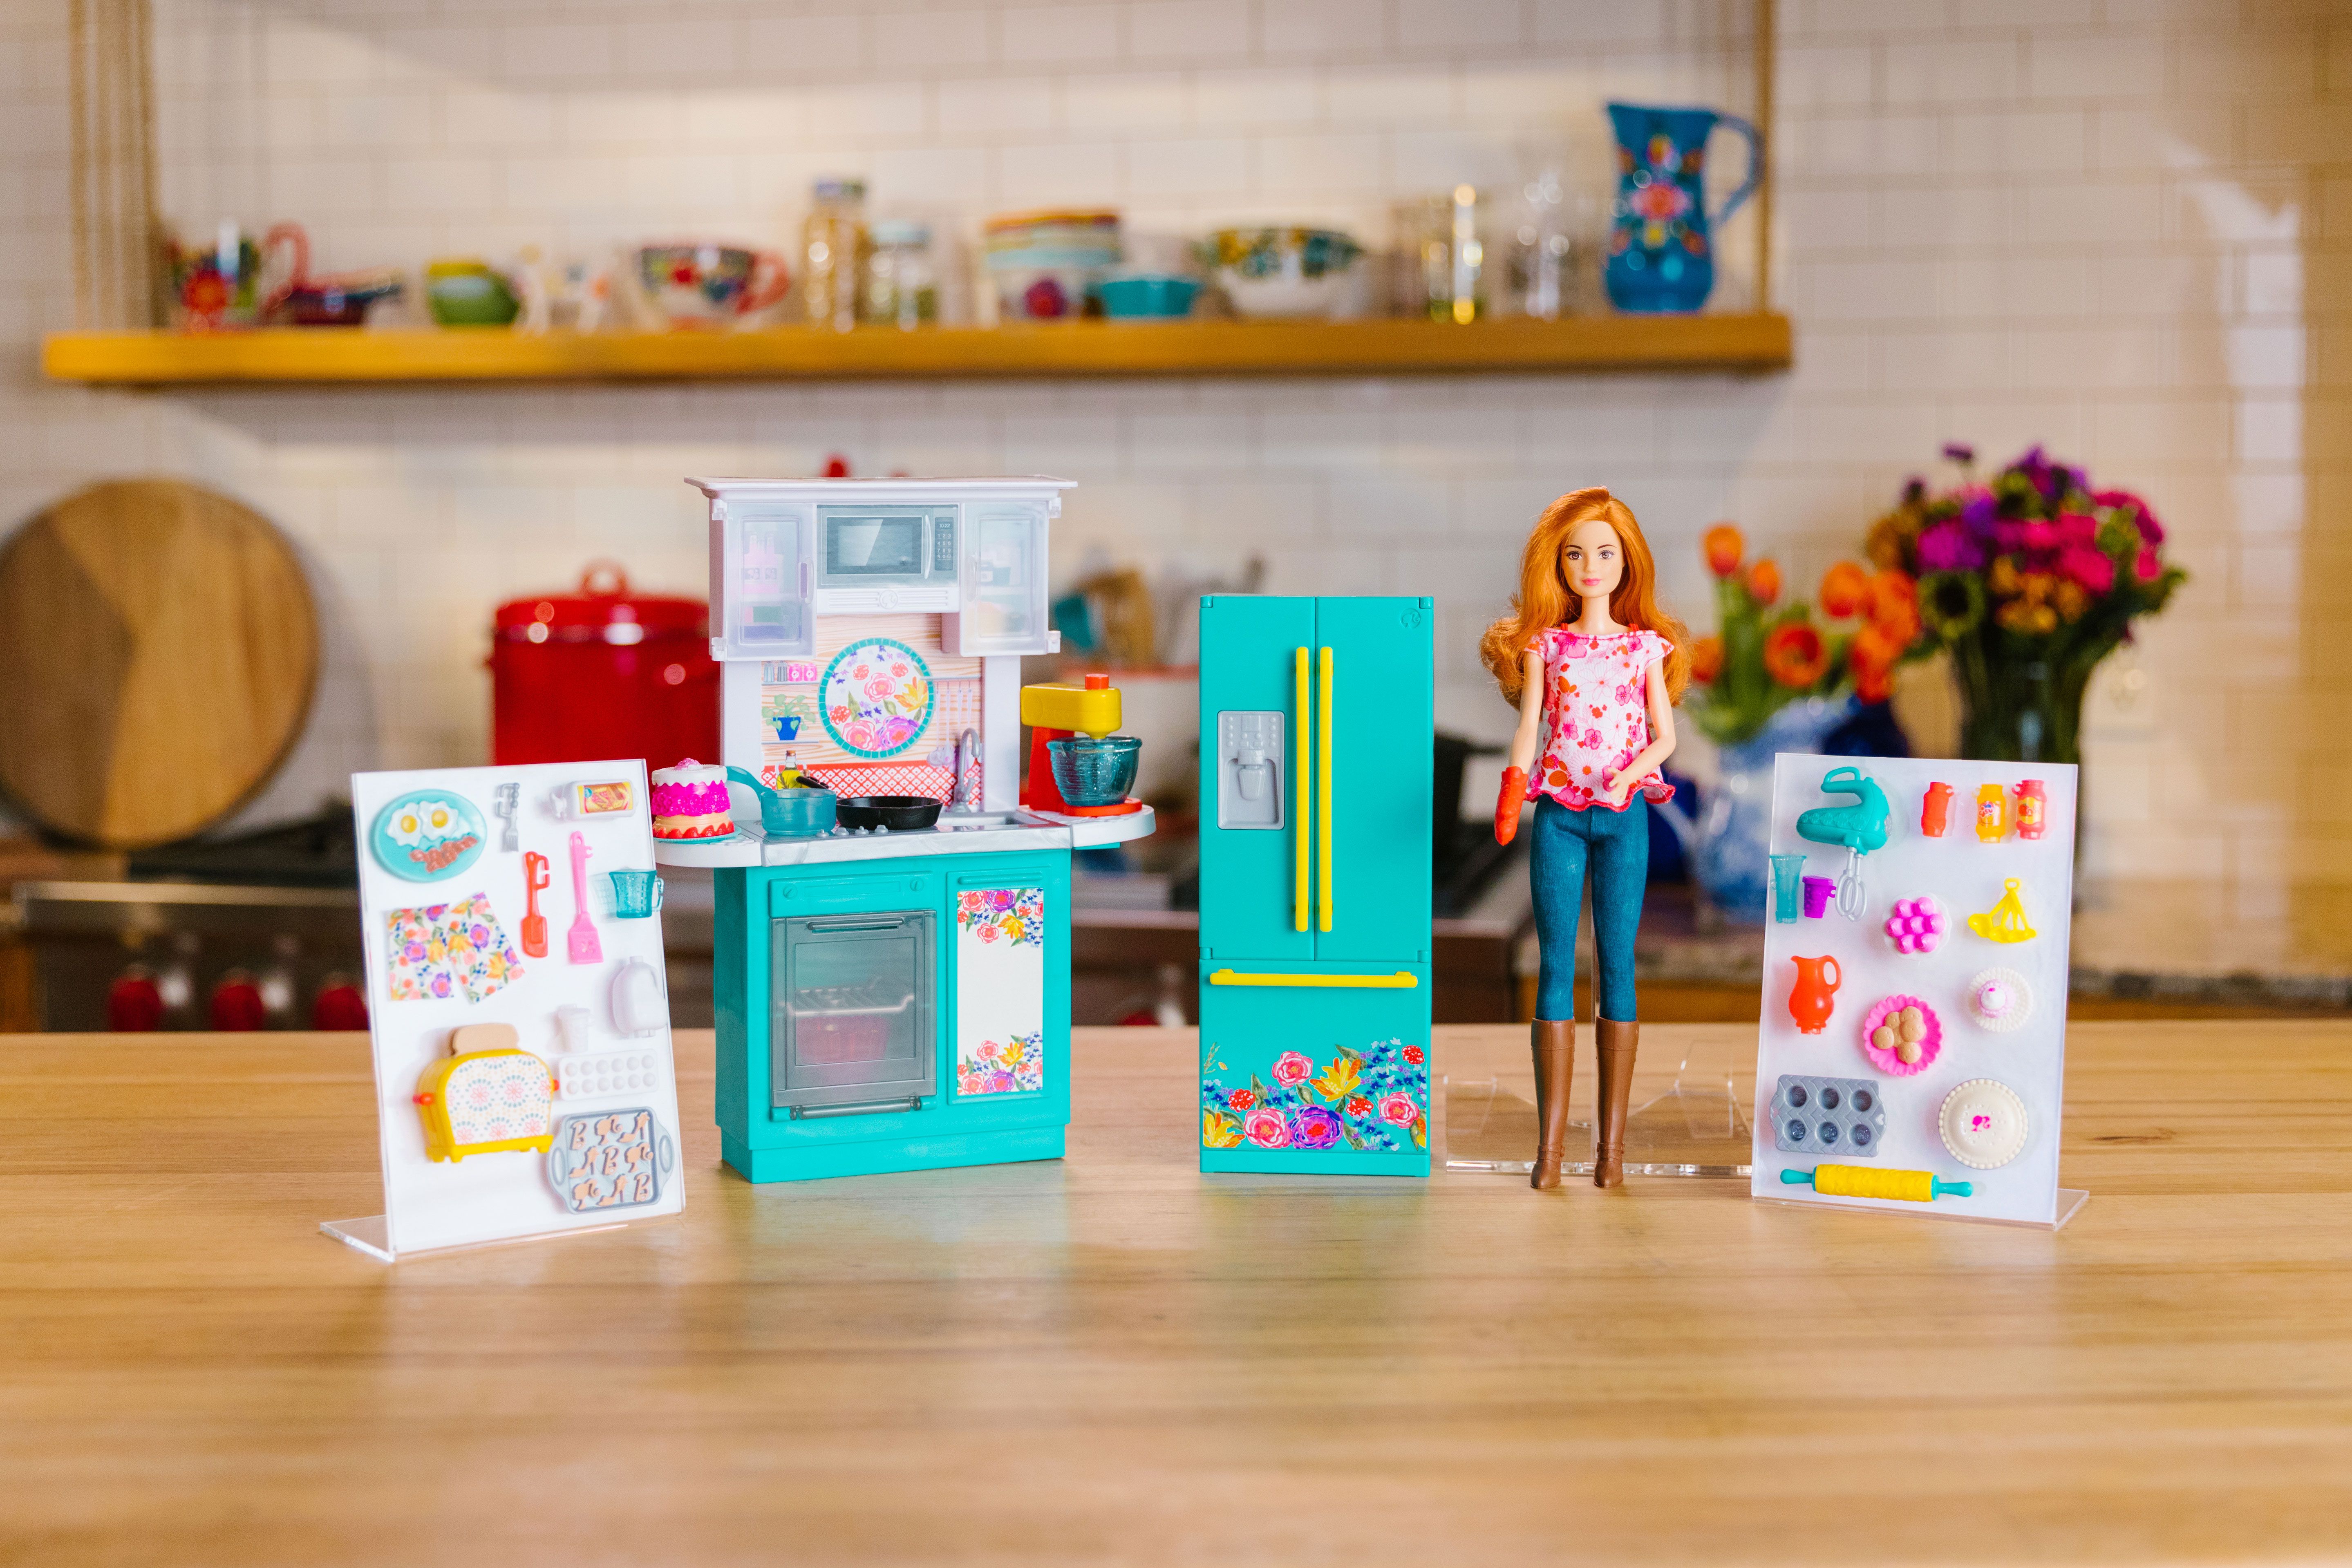 PIONEER WOMAN REE DRUMMOND CHEF DOLL & KITCHEN PLAYSET BARBIE COOKWARE 